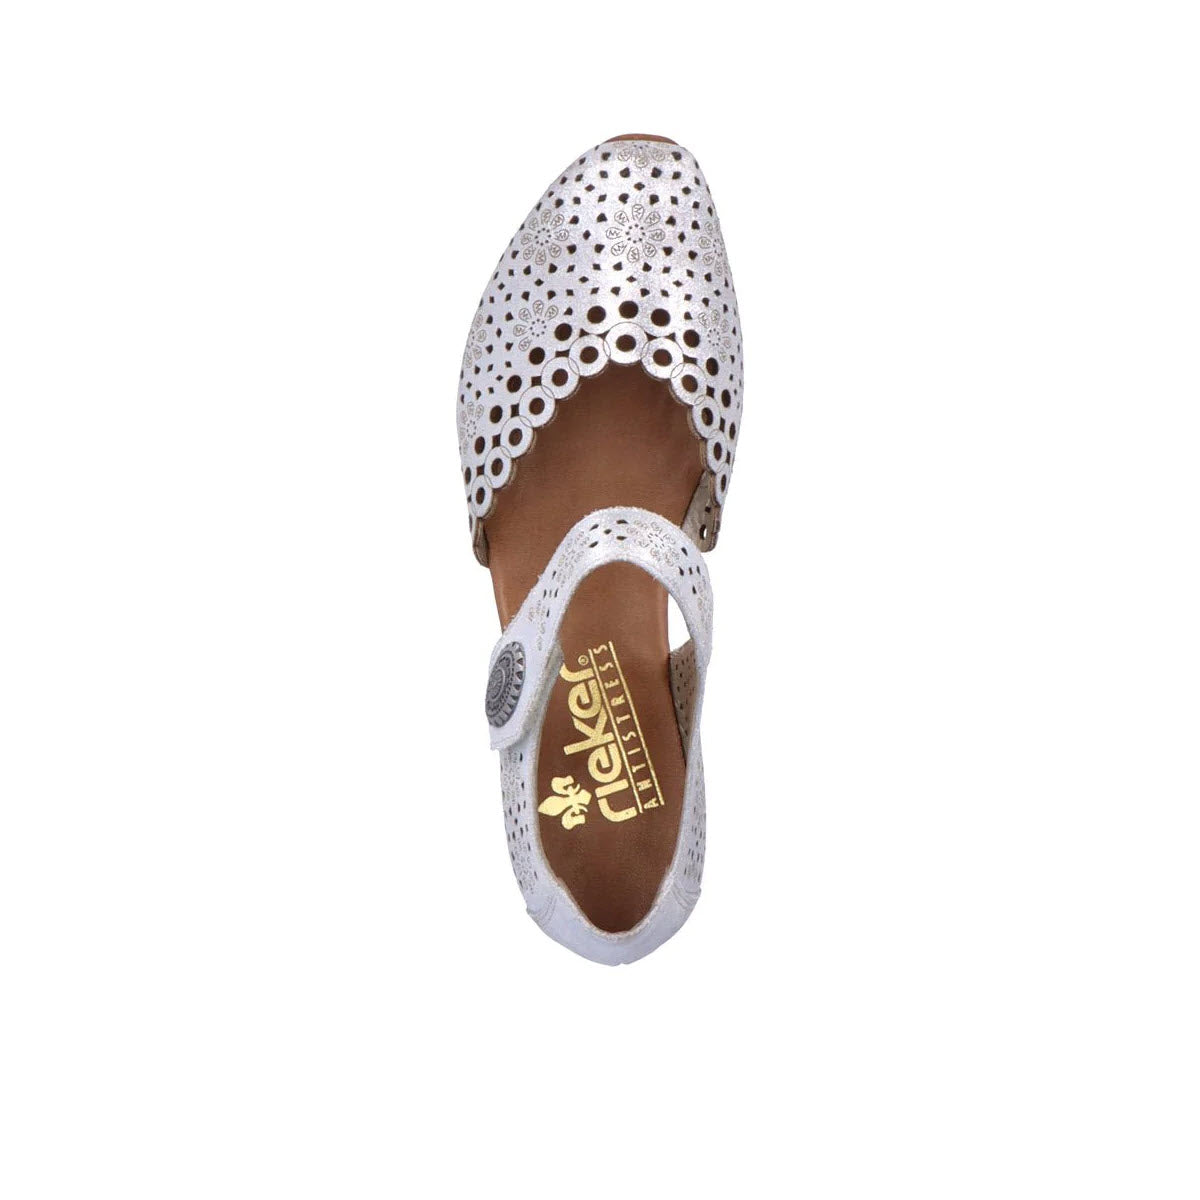 Top view of a single white perforated Rieker flat shoe with a round toe and a brown insole, featuring an adjustable ankle strap, isolated on a white background.